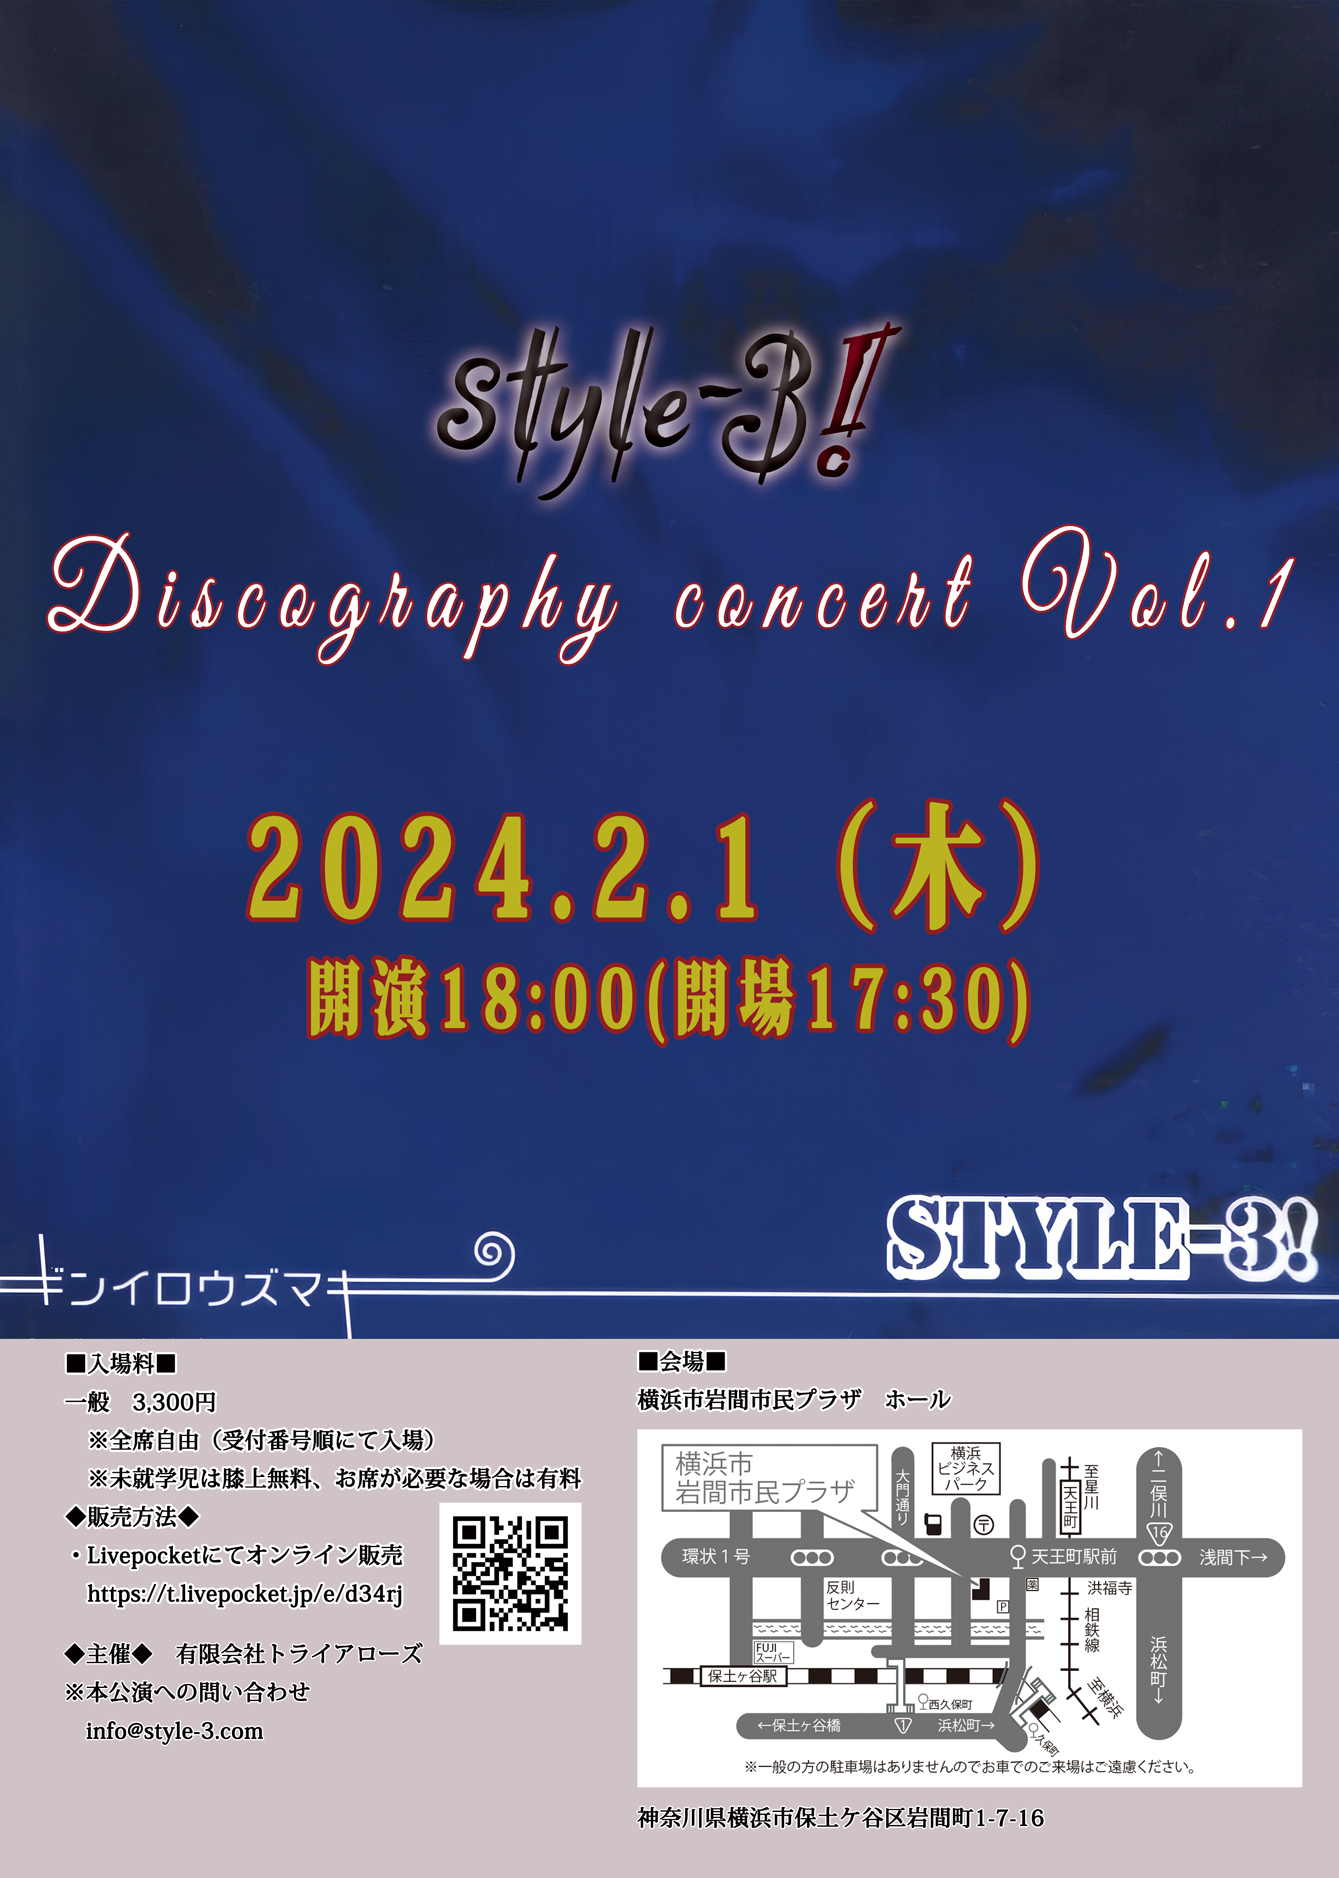 style-3! Discography concert Vol.1